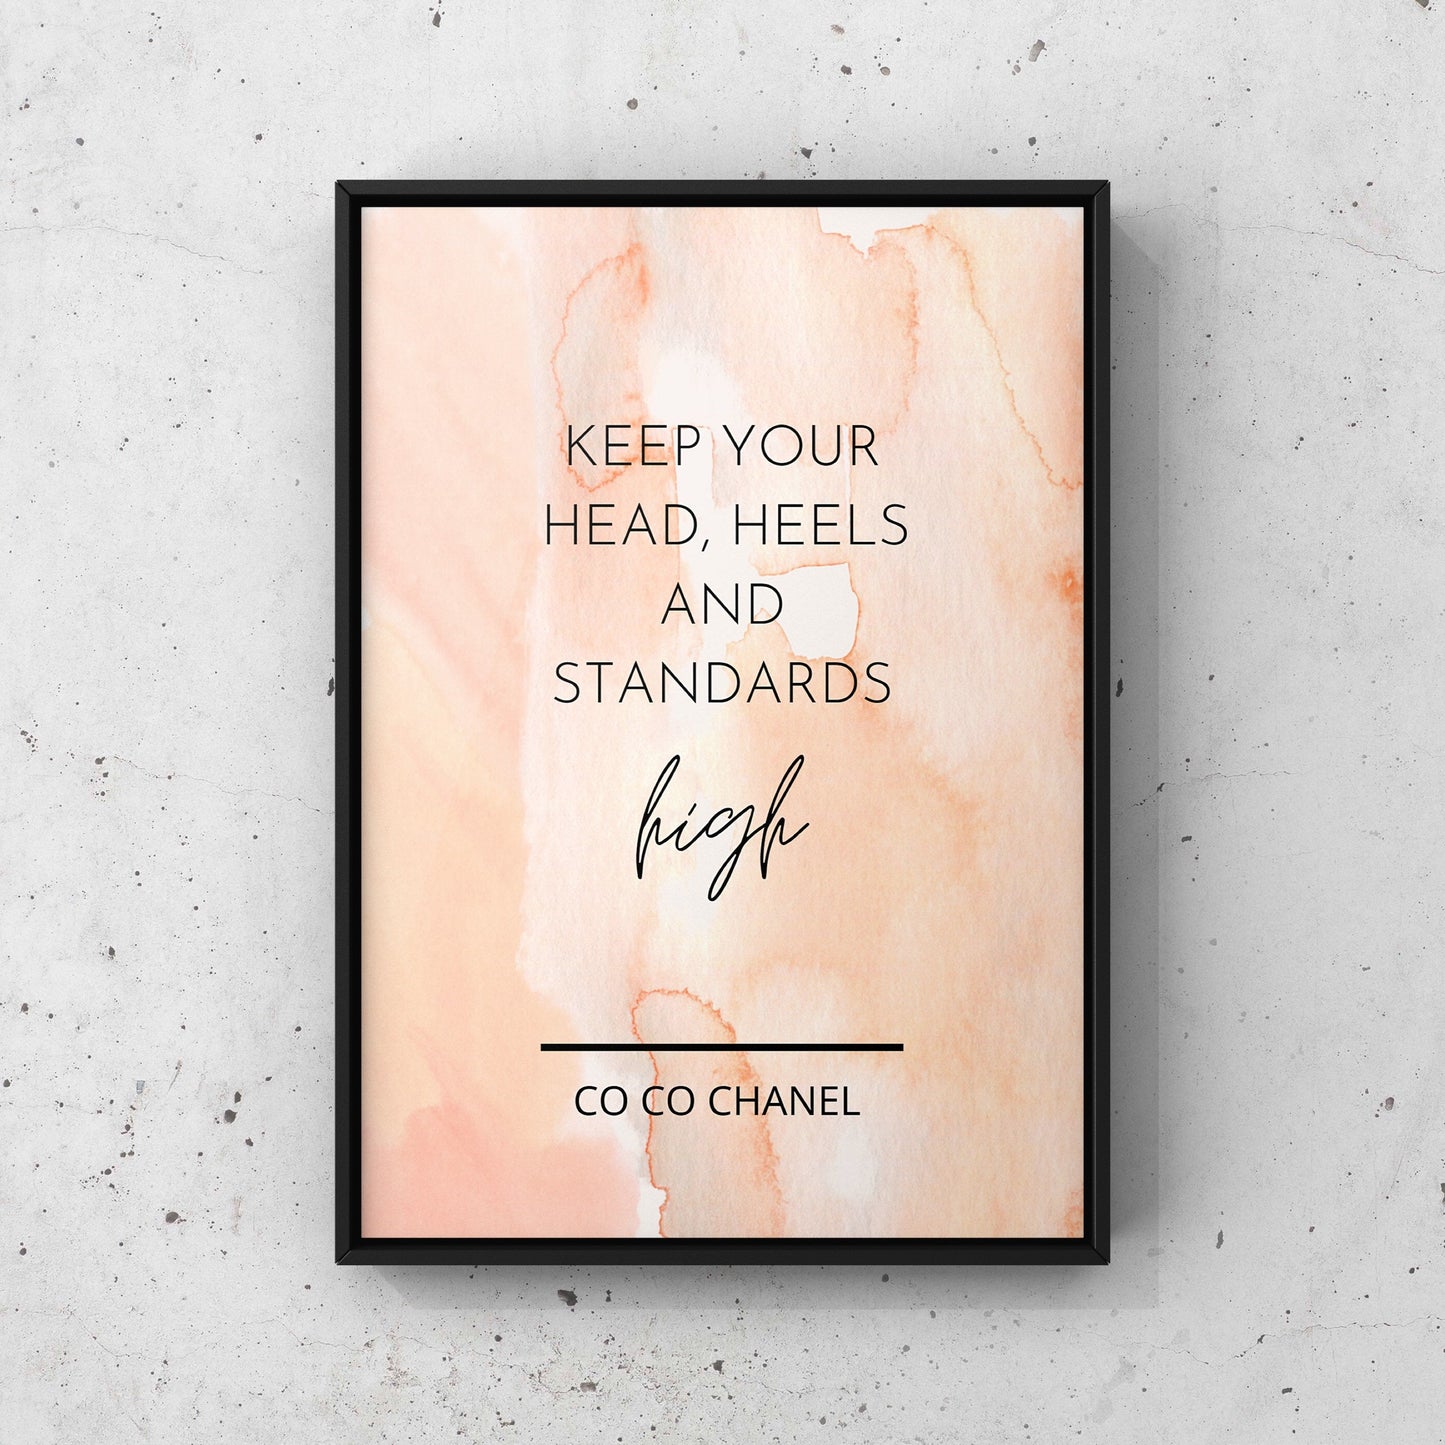 Keep your head, heels and standards high